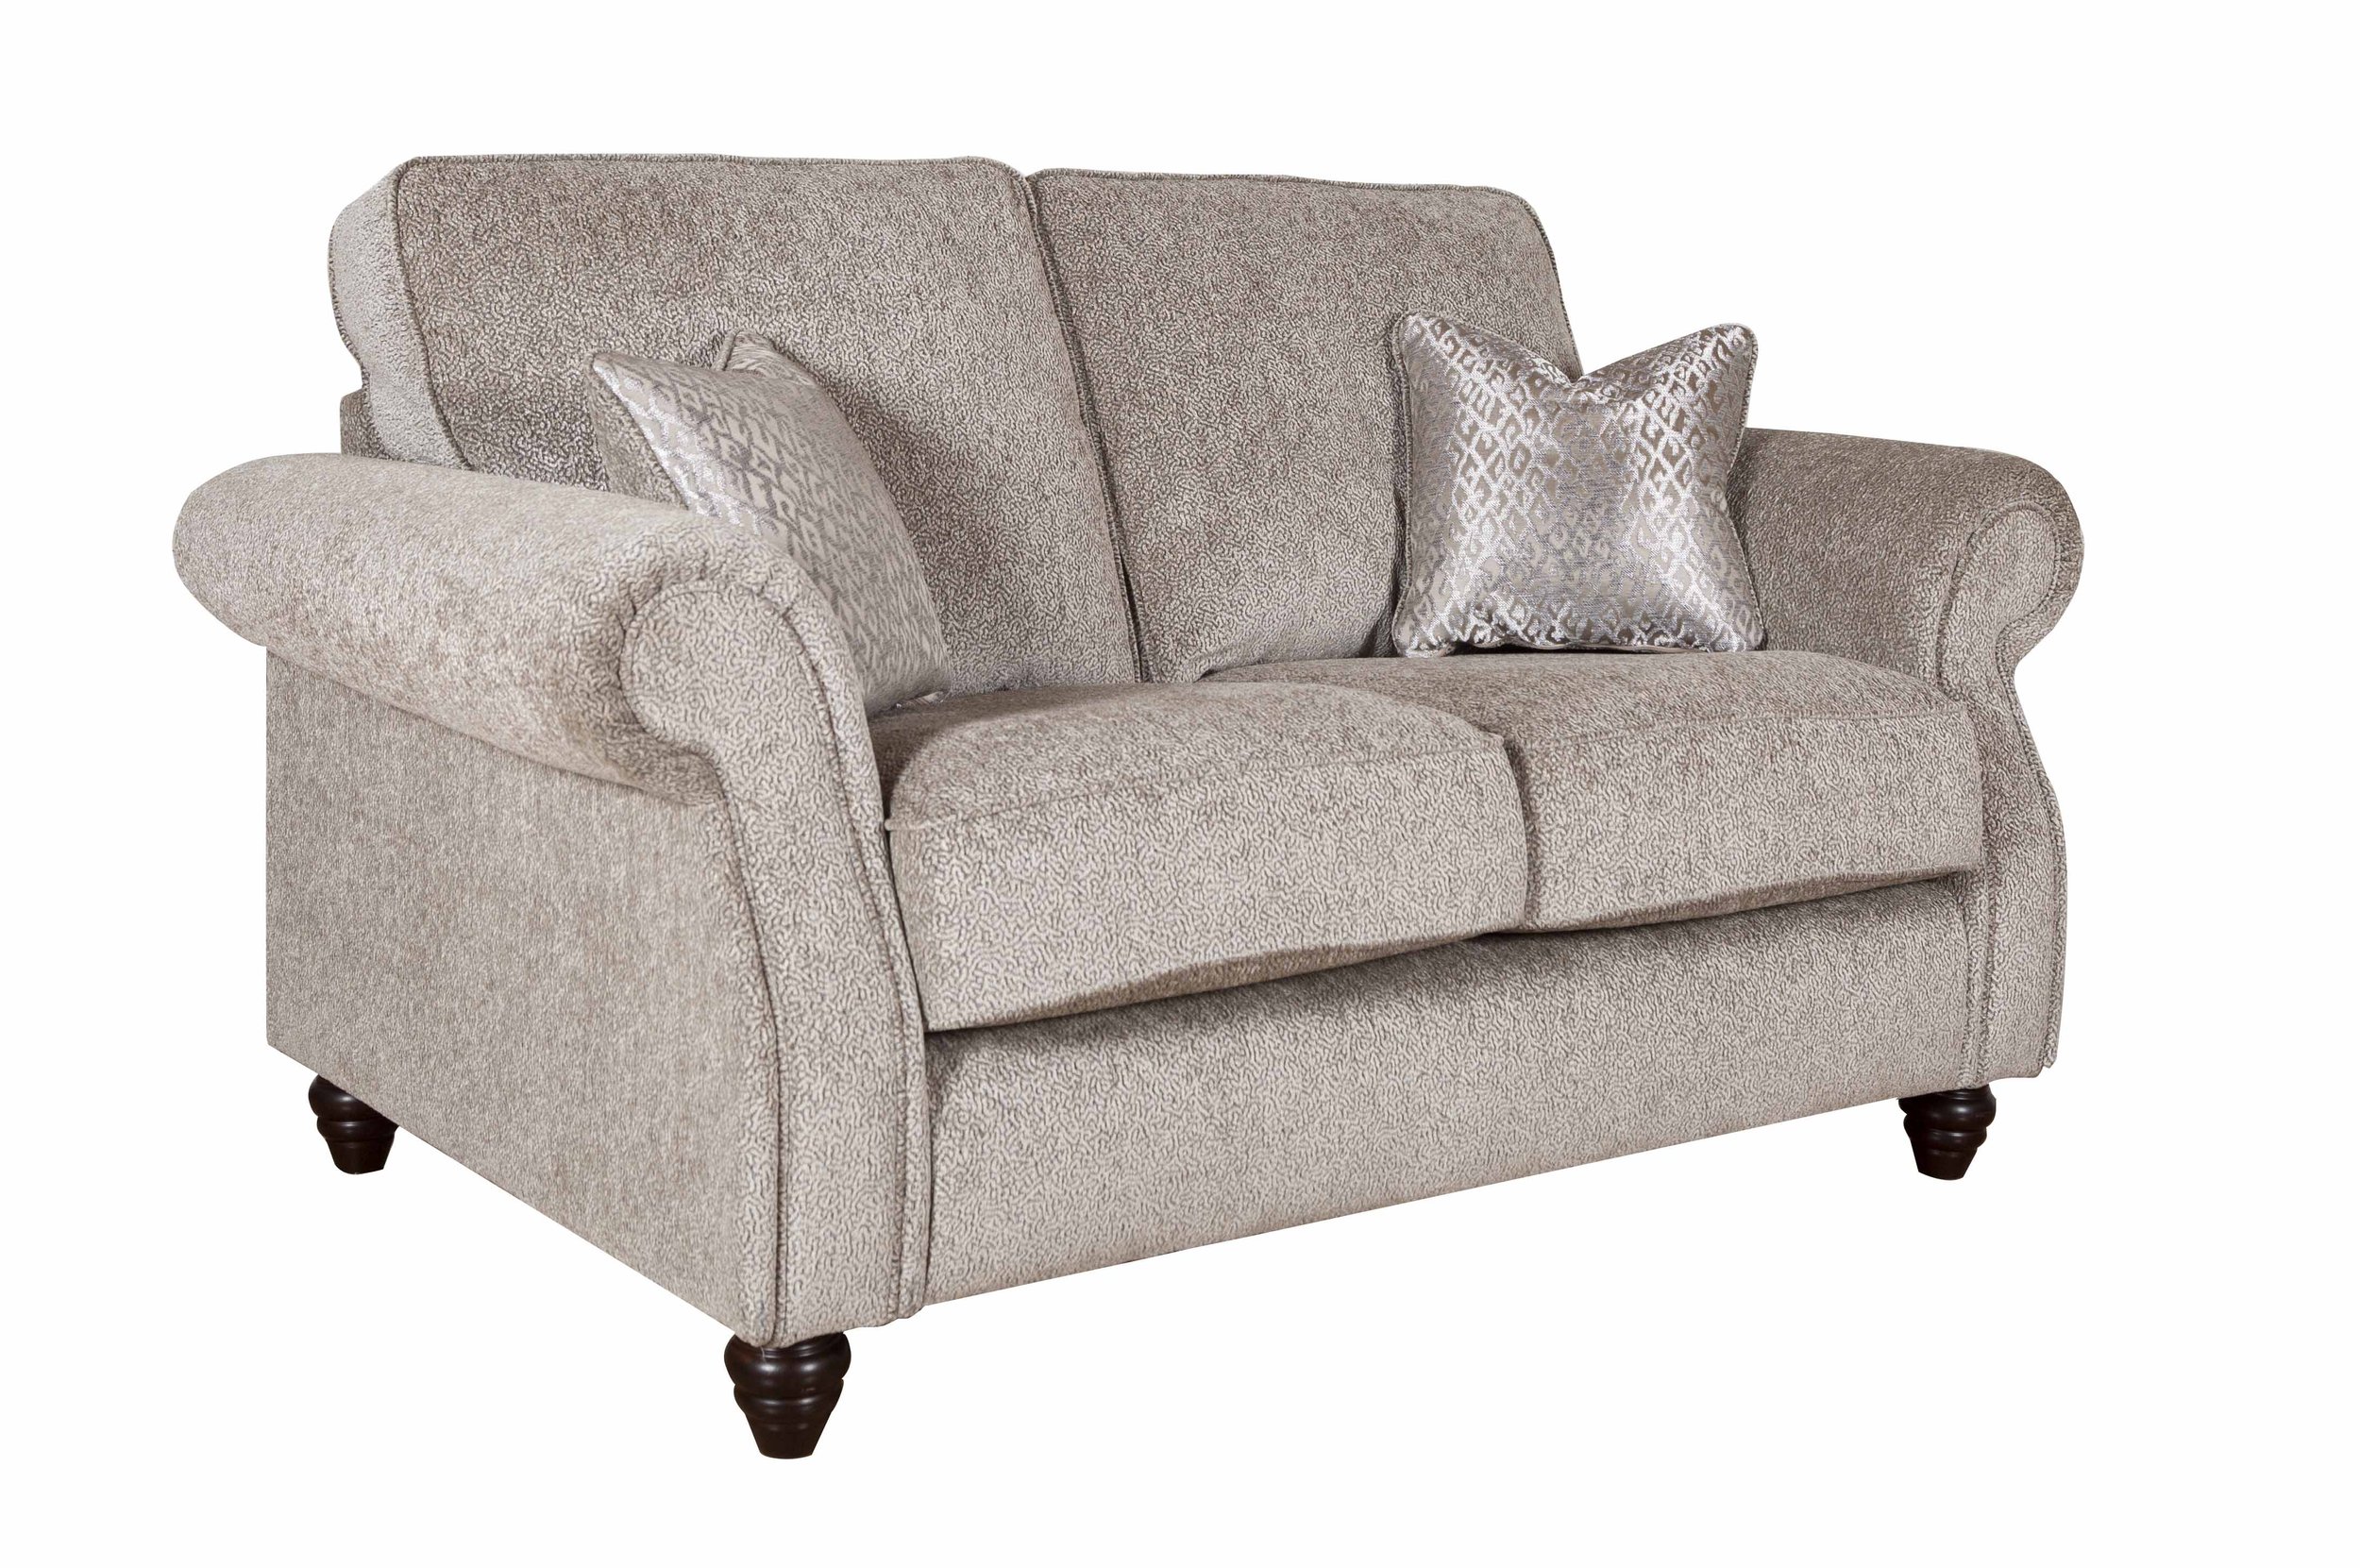 Finley special - 2 seater - Angled - Romance Diamond Silver.jpg